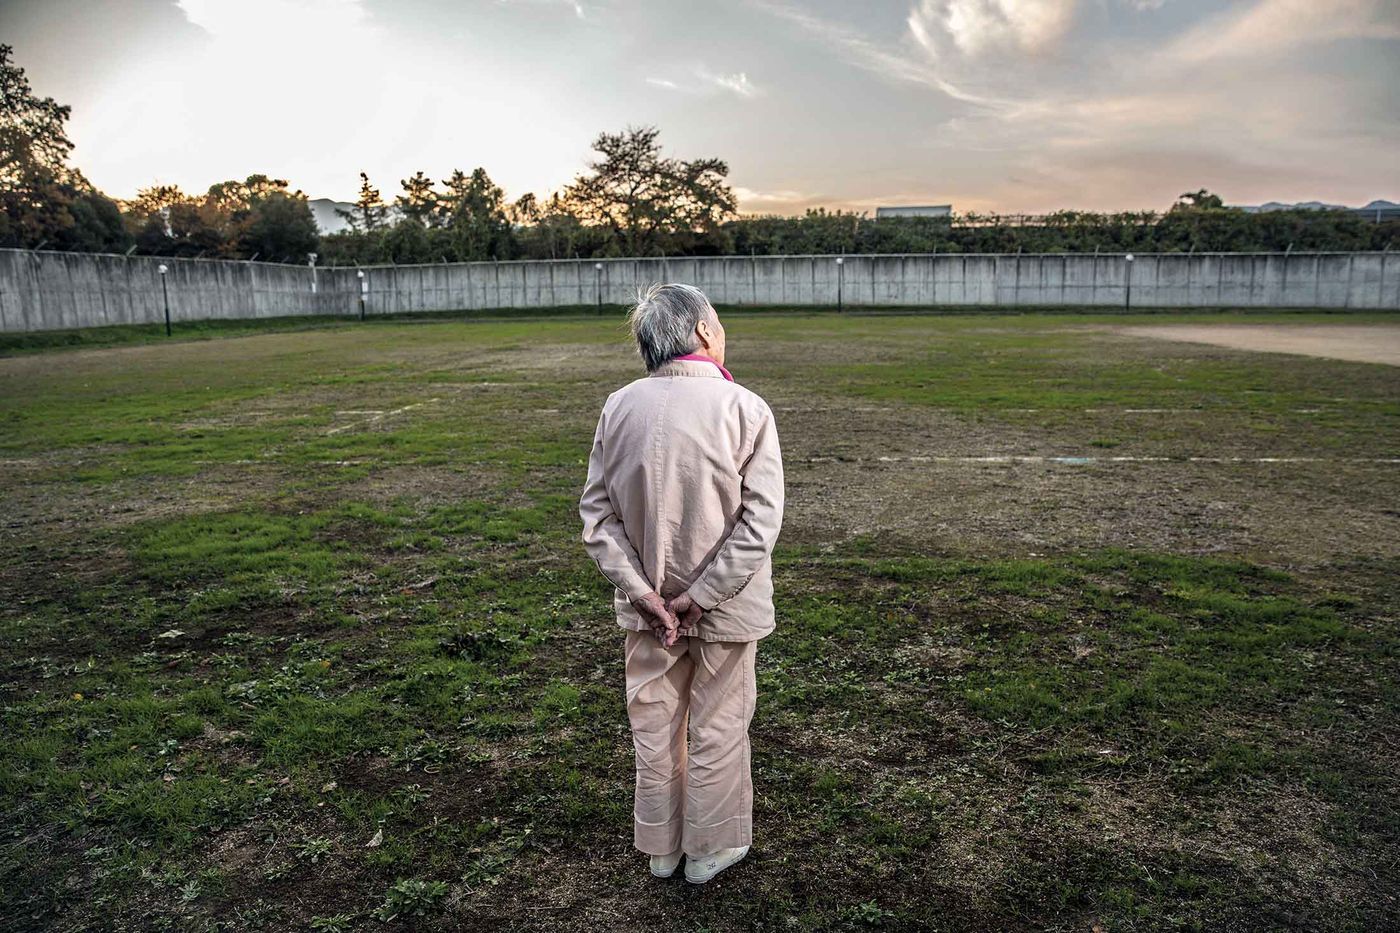 “I was 84 when I came to prison for the first time.” Image by Shiho Fukada. Japan, 2017.